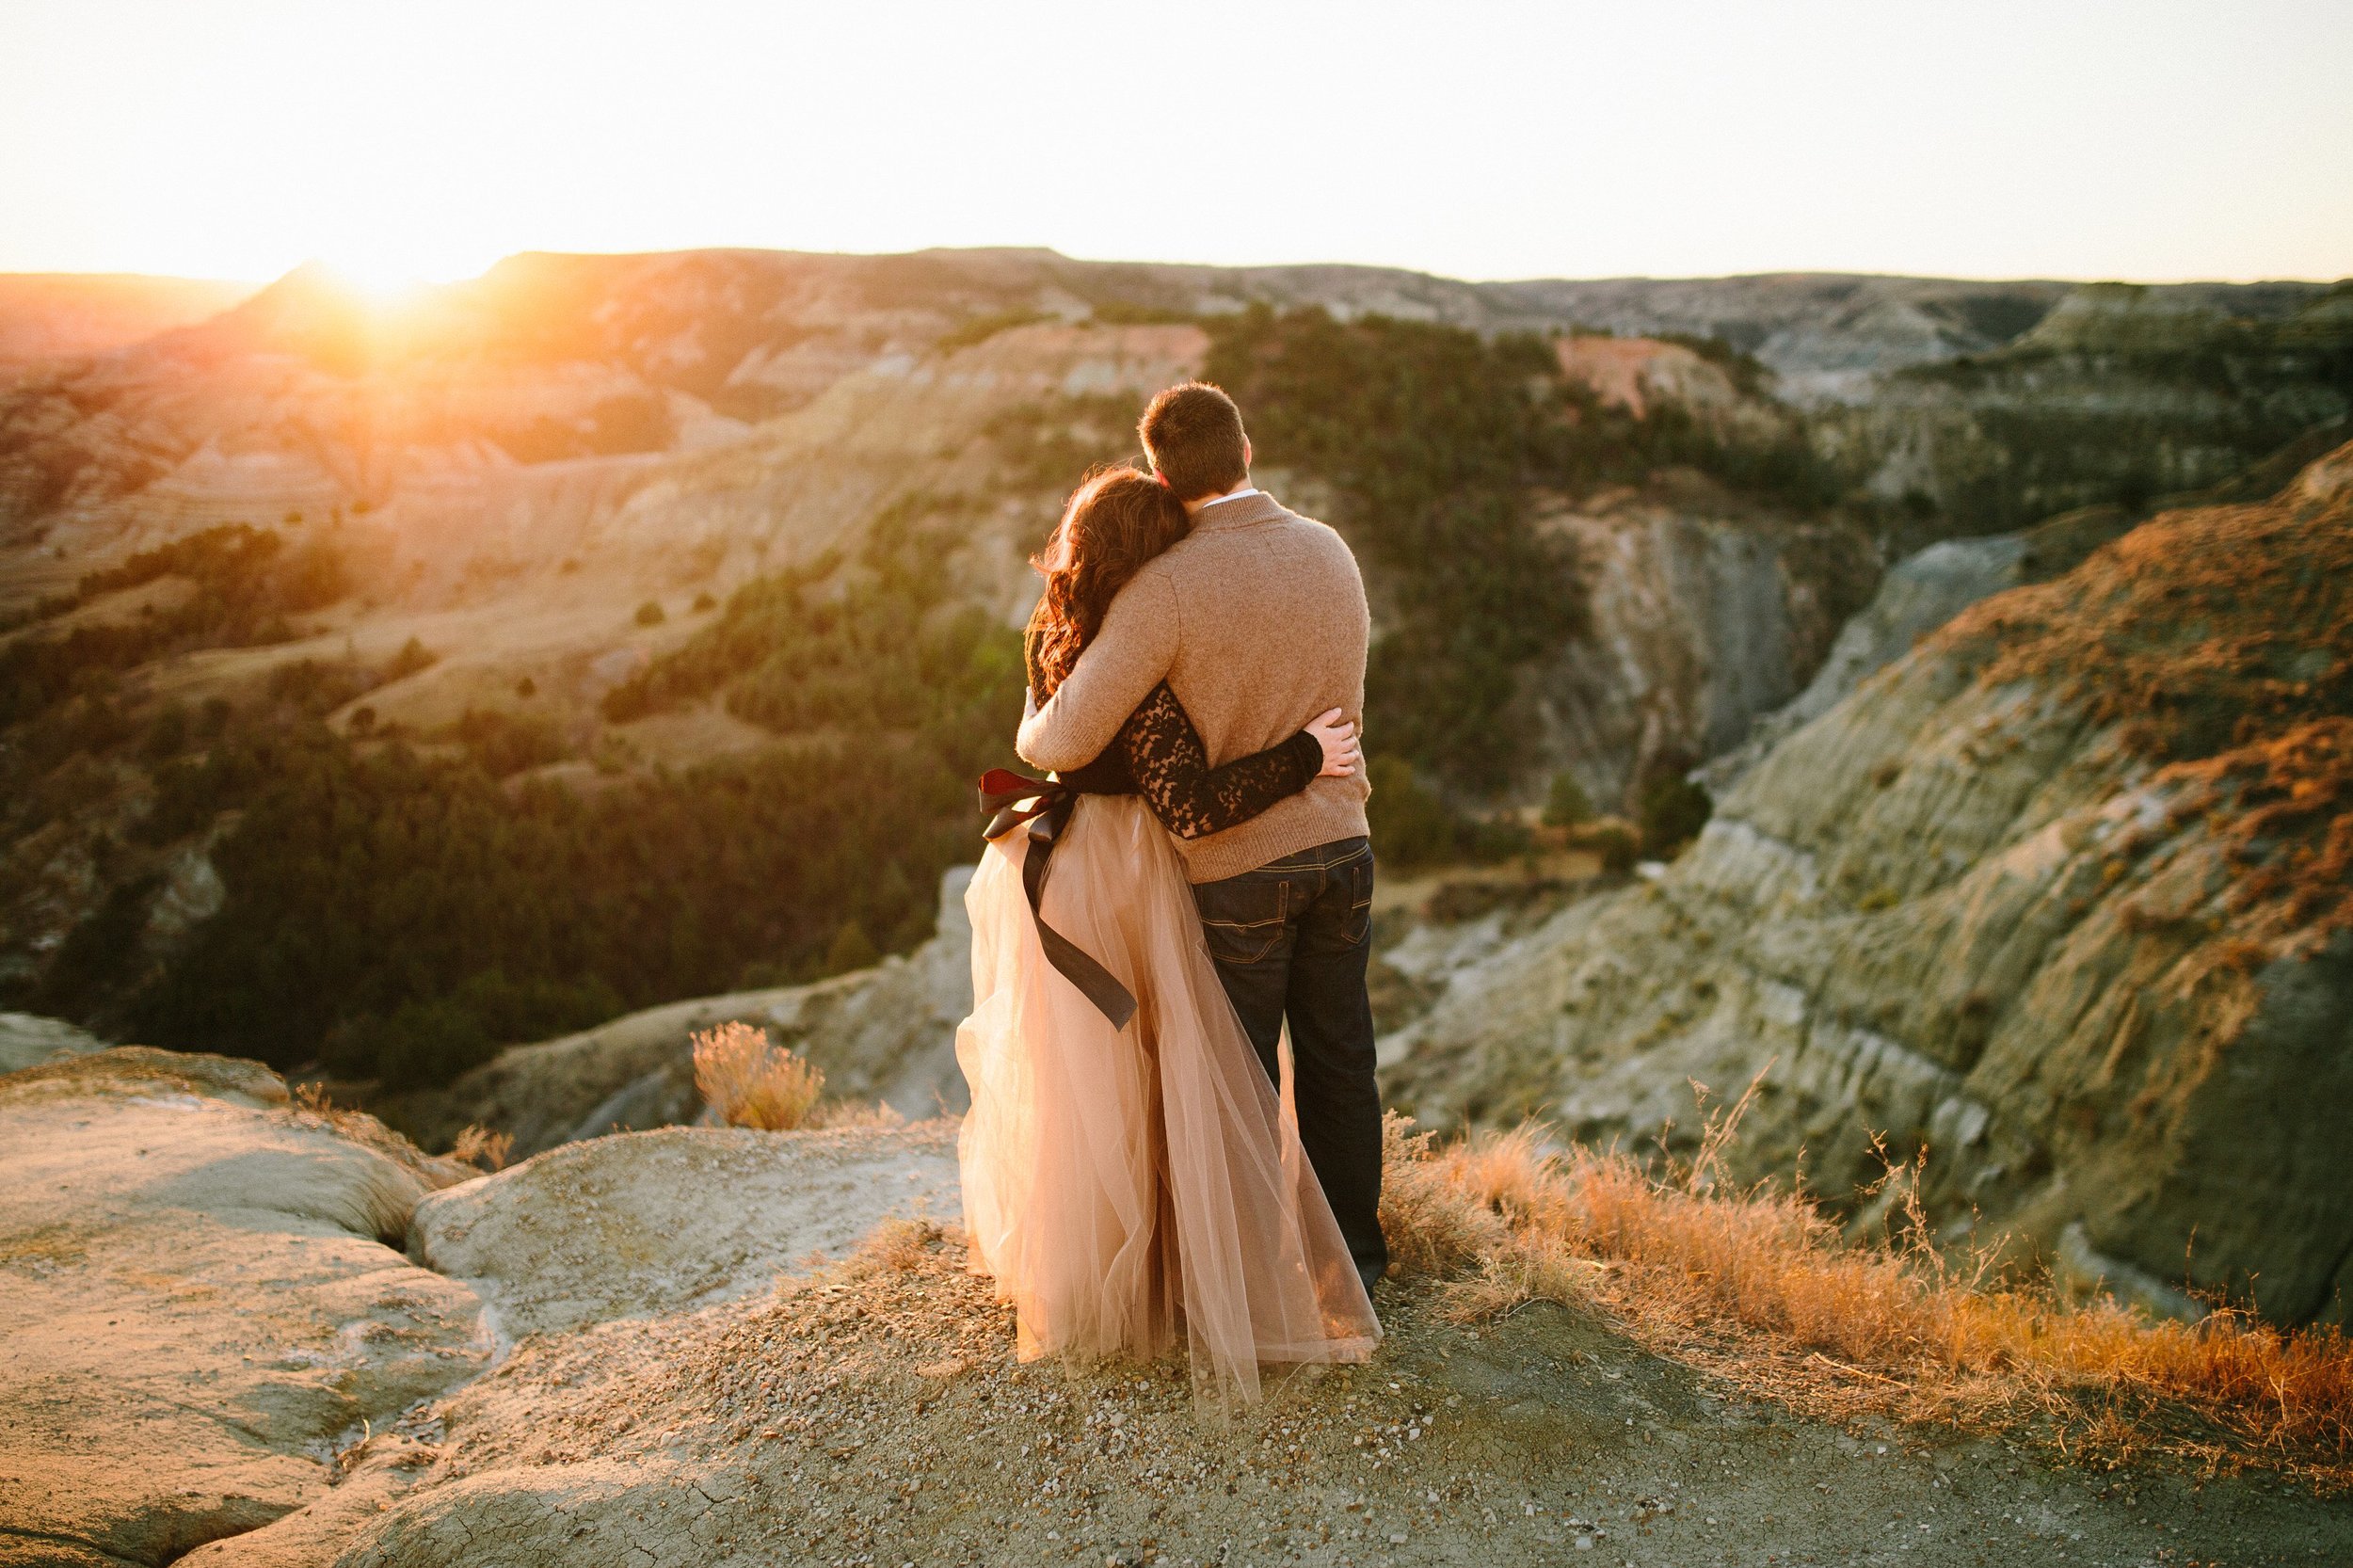 Romantic Sunset Couples Session at the Theodore Roosevelt National Park in North Dakota by Seattle WA destination photographer Janelle Elaine Photography with pink tulle skirt.jpg